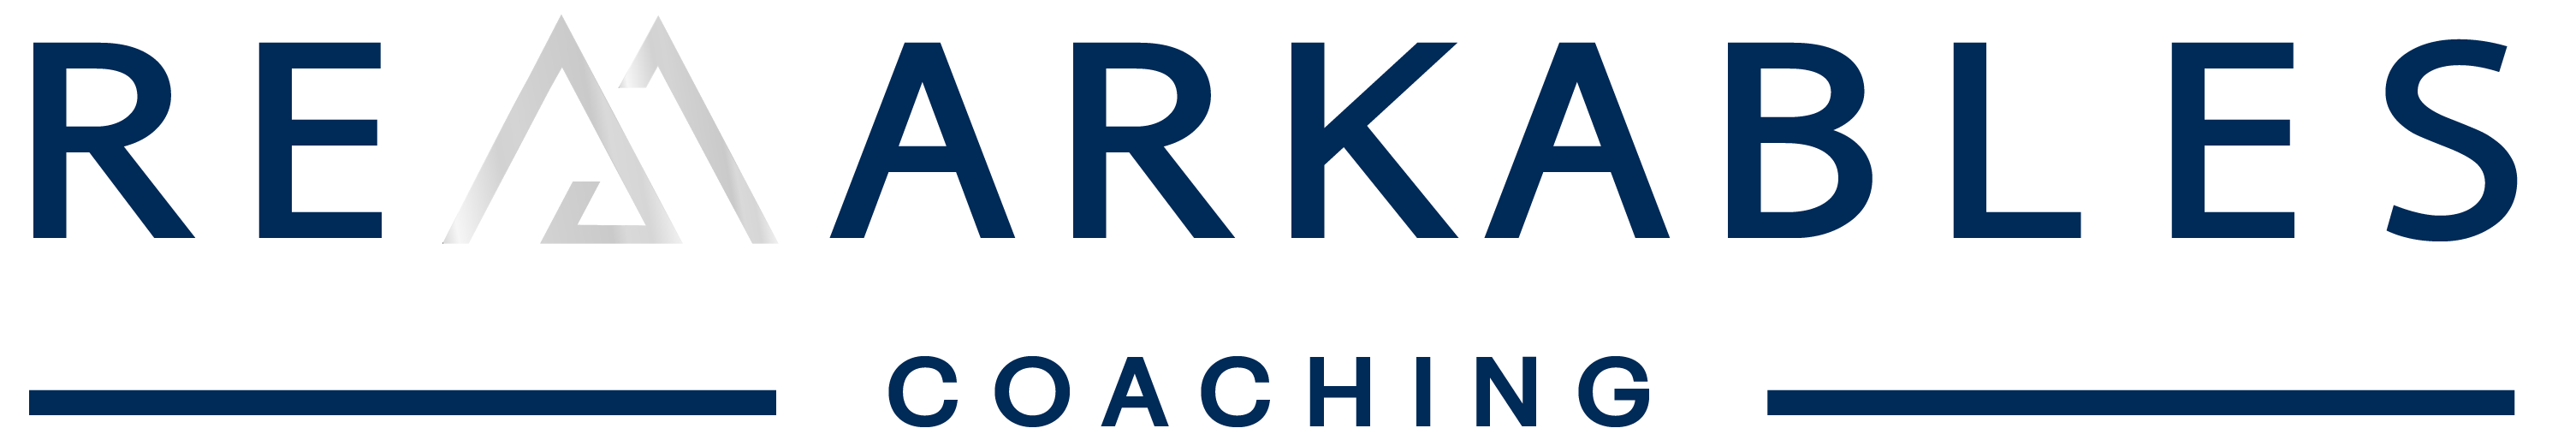 Remarkables Coaching